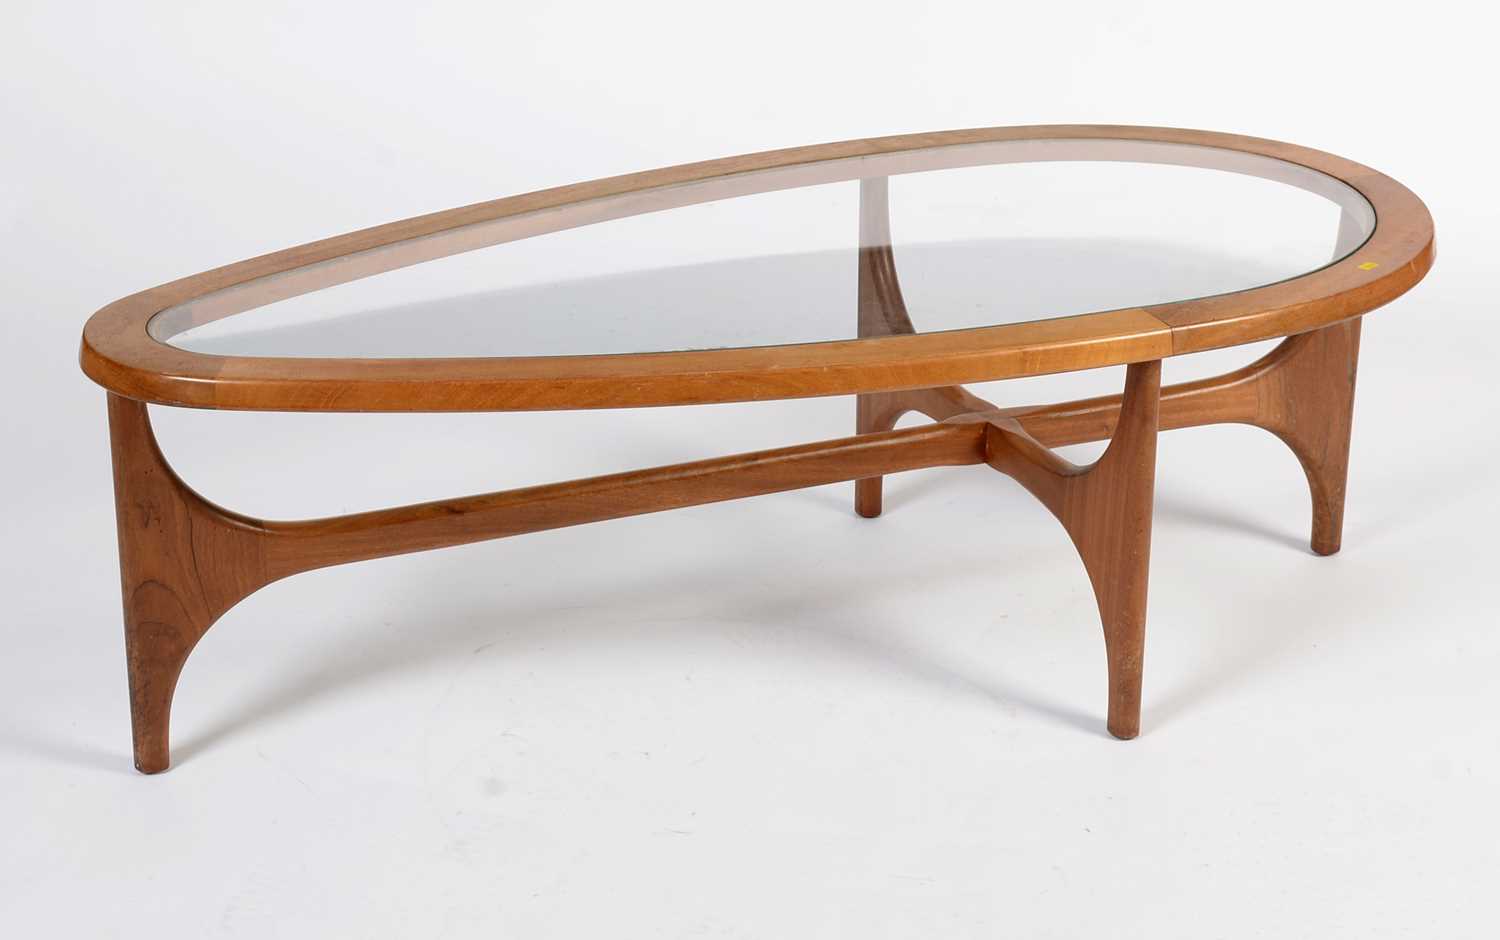 Stateroom by Stonehill: a mid-Century teak and glass coffee table of teardrop form - Image 2 of 8